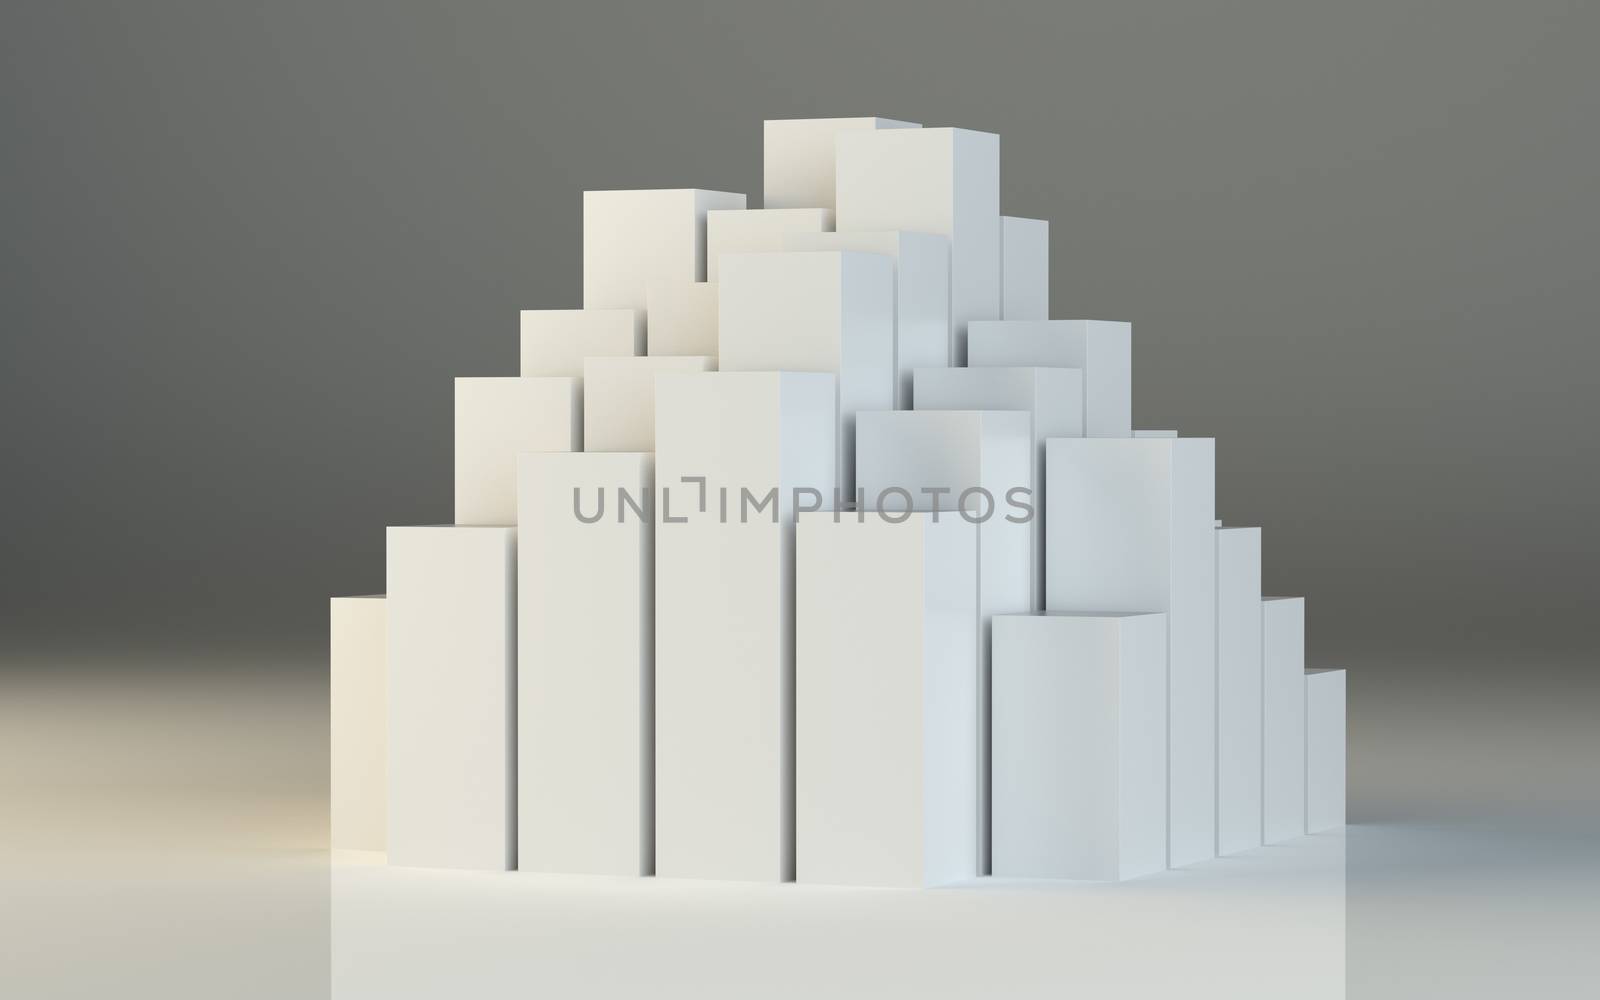 Abstract 3d illustration of white boxes and gray gradient background. Beautiful studio lighting